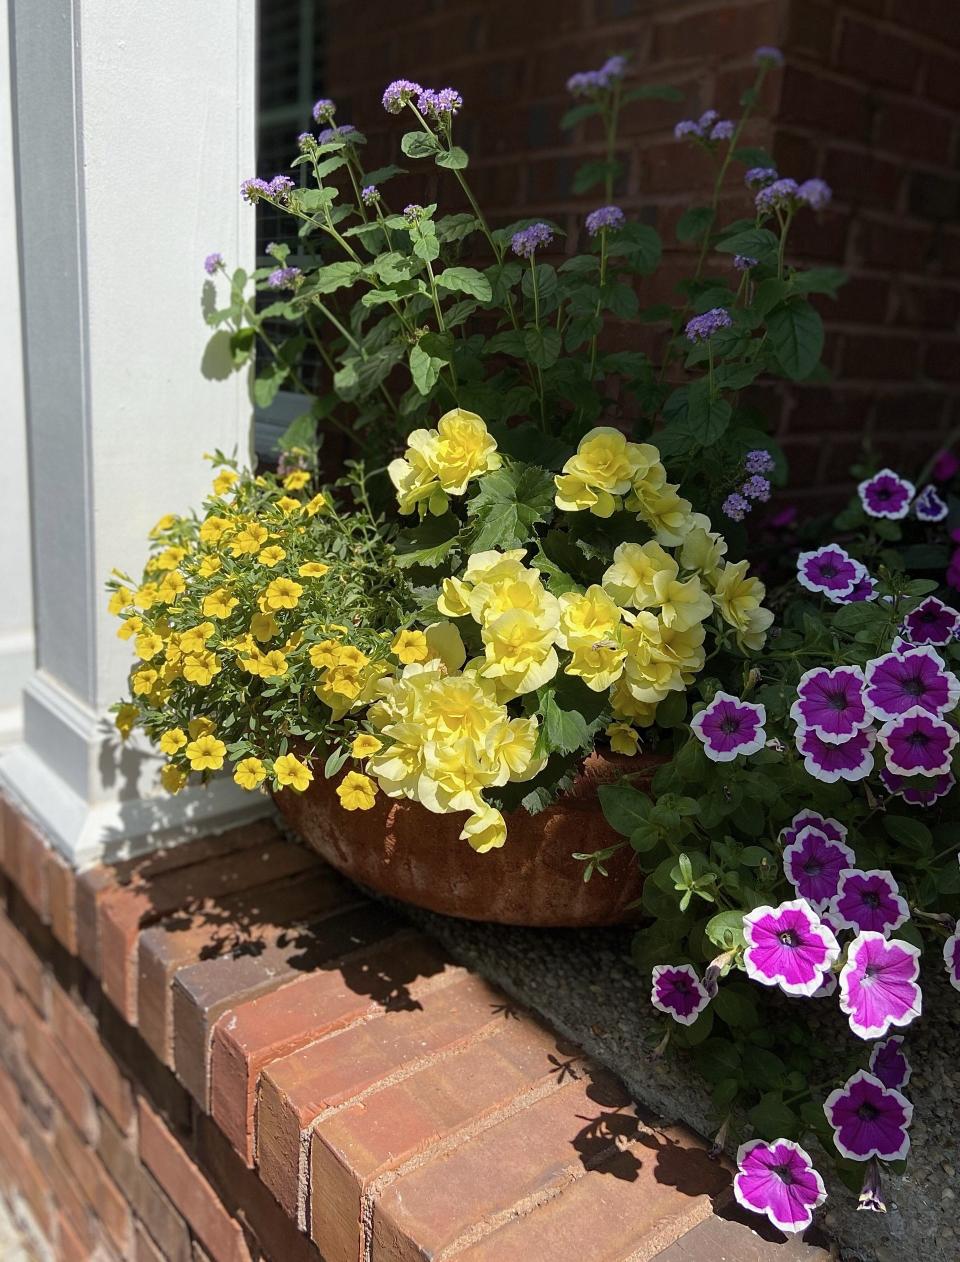 The Garden Guy’s neighbors Dave and Cynthia created this container with Solenia Yellow begonia, Superbells Yellow calibrachoa, Supertunia Hoopla Vivid Orchid petunia and Augusta Lavender heliotrope.